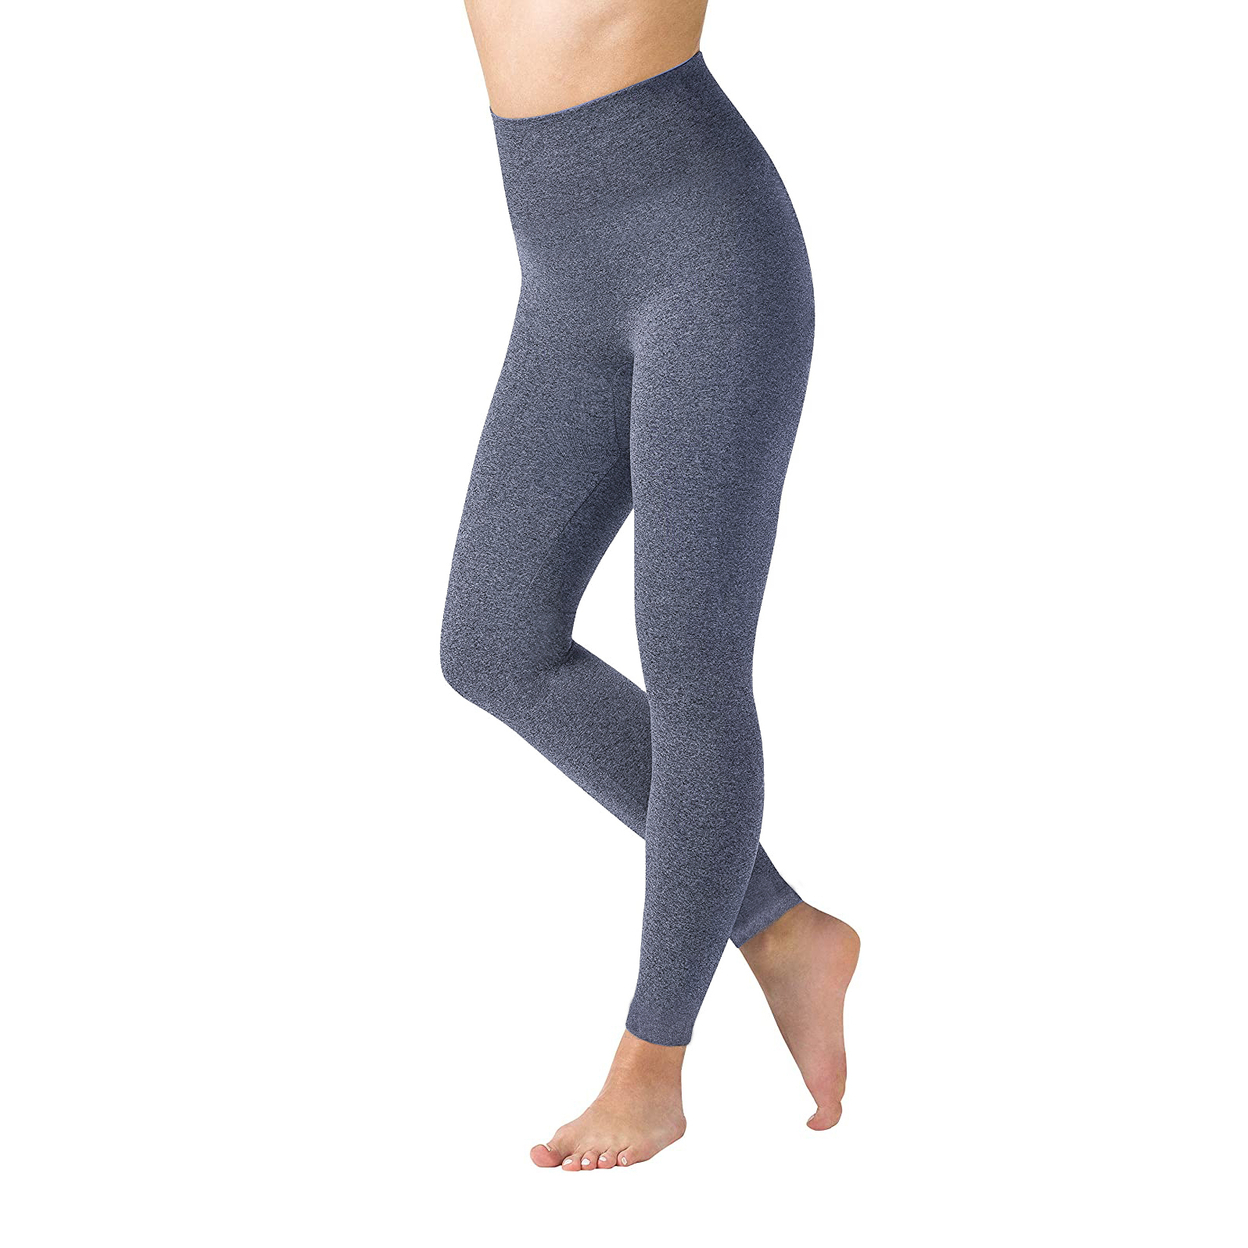 Women's High Waisted Ultra-Soft Fleece Lined Warm Marled Leggings(Available In Plus Sizes) - Charcoal, Medium